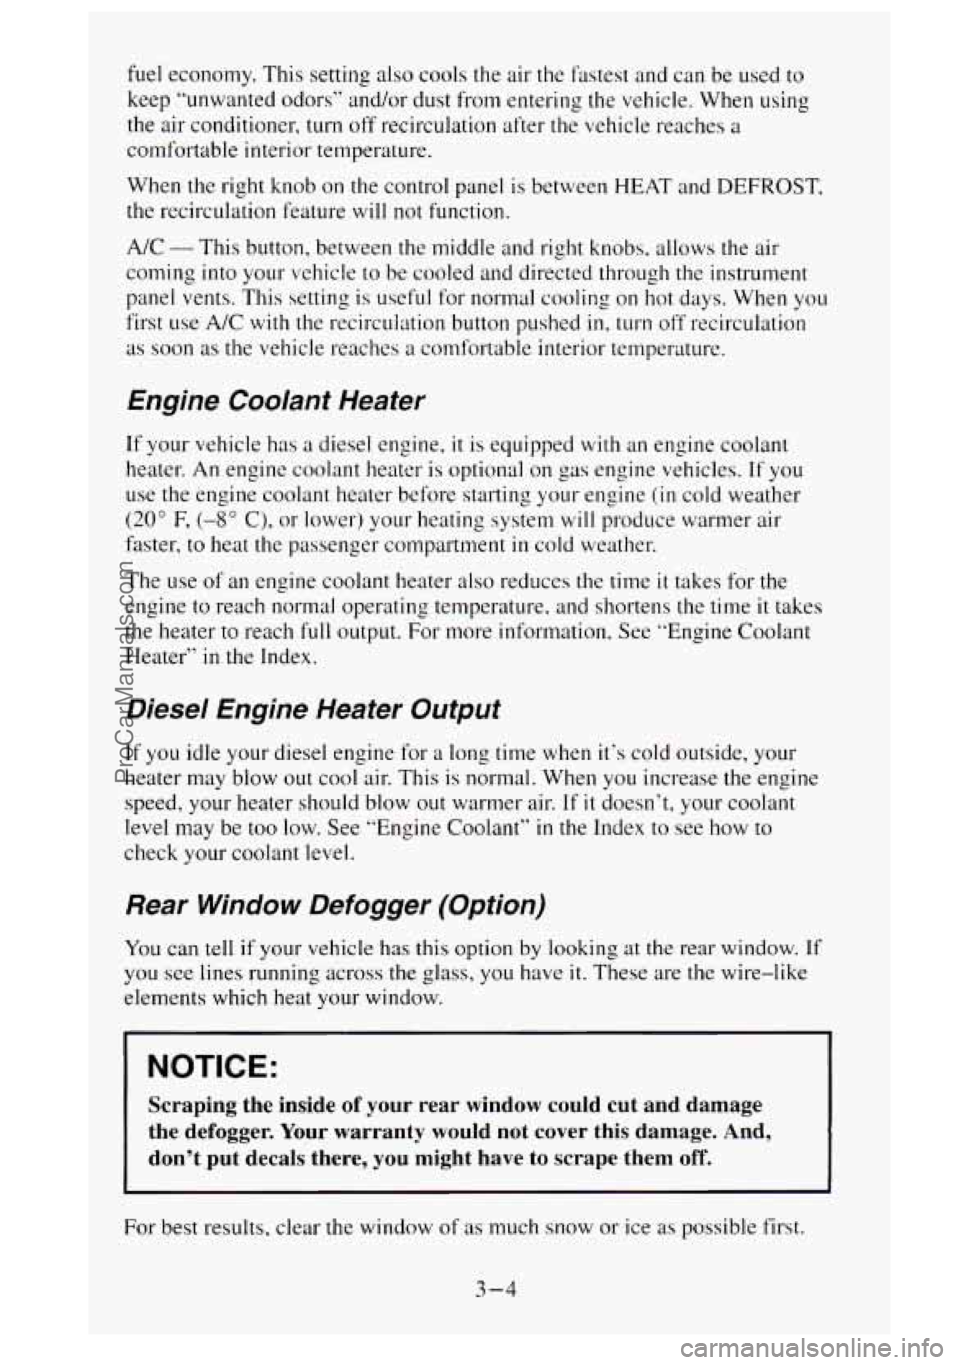 GMC SIERRA 1995  Owners Manual fuel economy. This setting also  cools the air  the fastest and can  be  used to 
keep  “unwanted odors”  and/or dust from  entering the vehicle. When  using 
the air conditioner,  turn  off recir